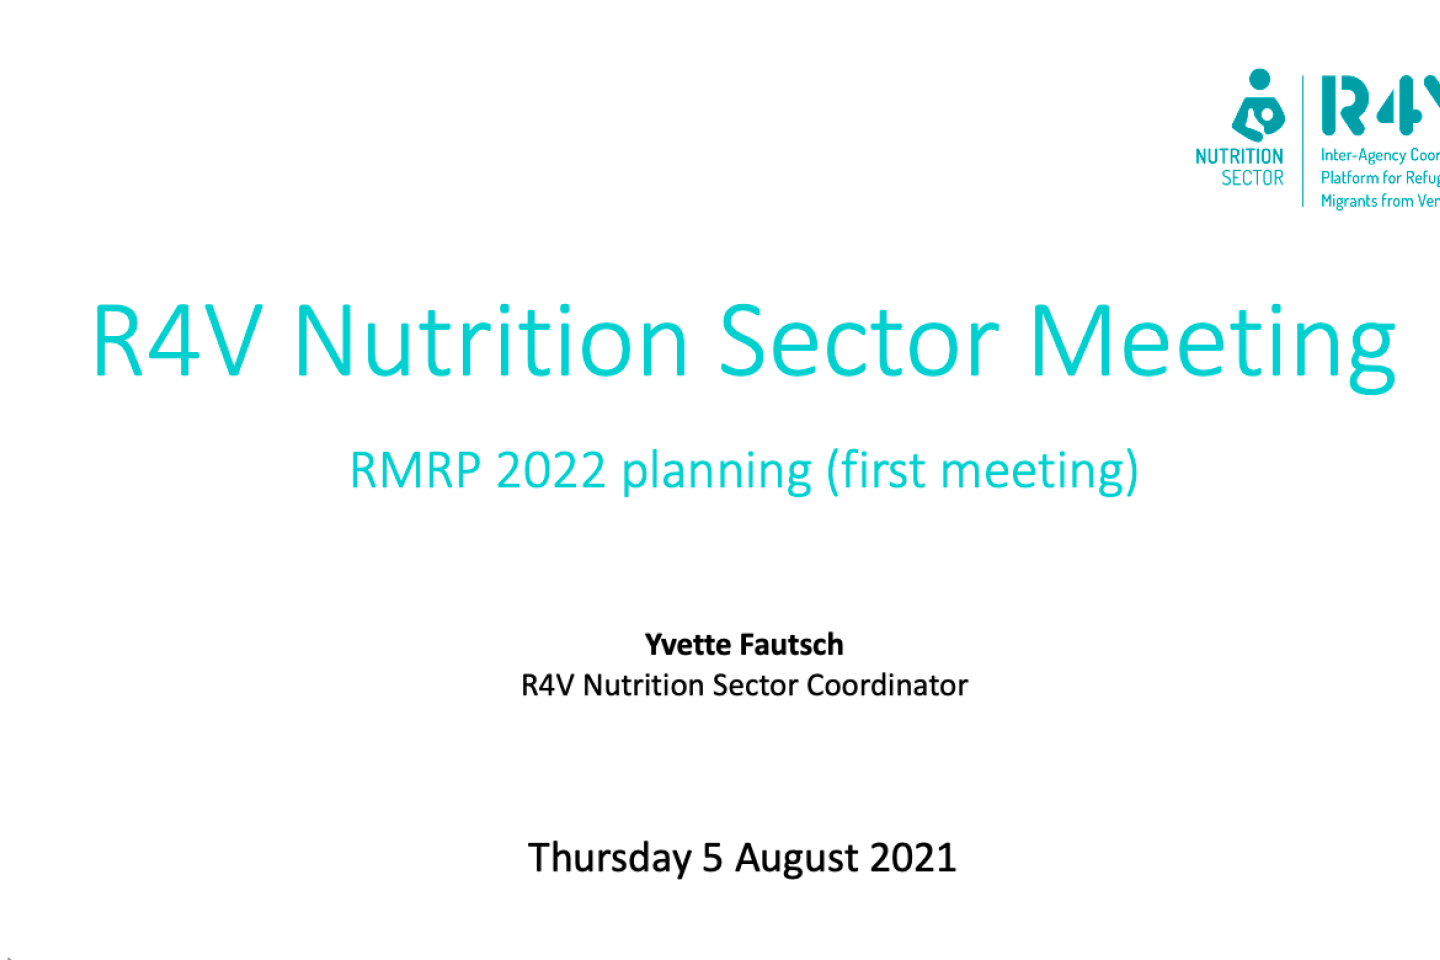 Nutrition sector first meeting